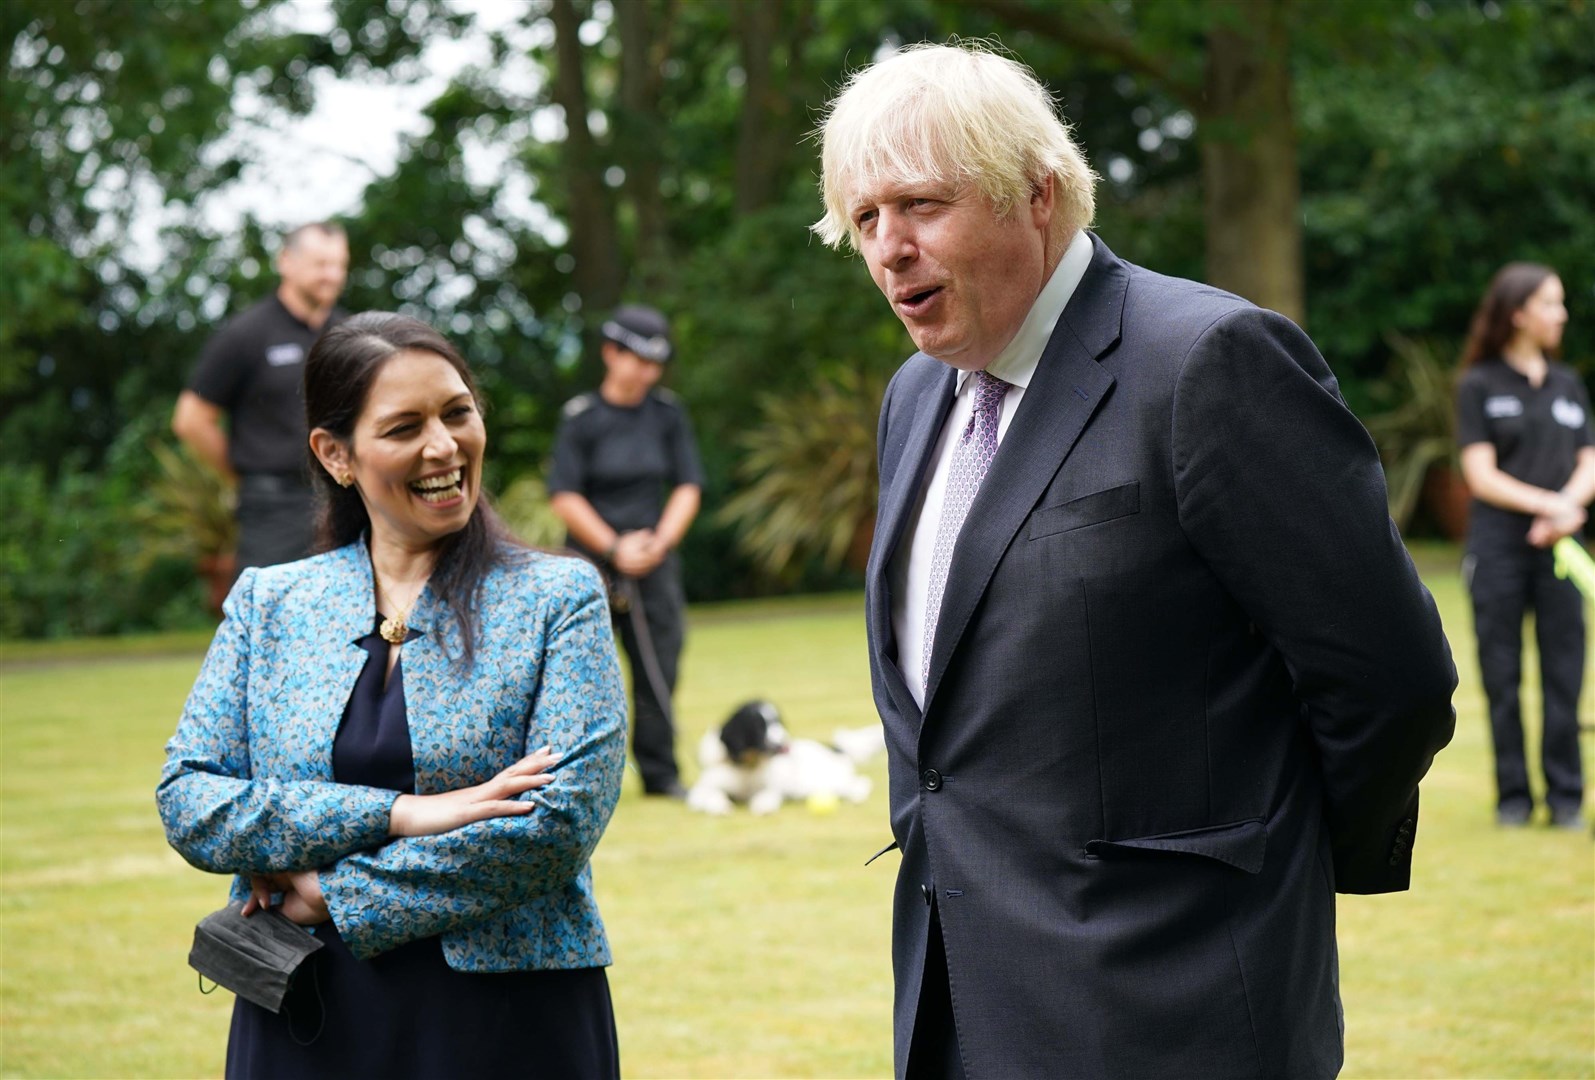 Prime Minister Boris Johnson and Home Secretary Priti Patel during a visit to Surrey Police headquarters in Guildford (PA)